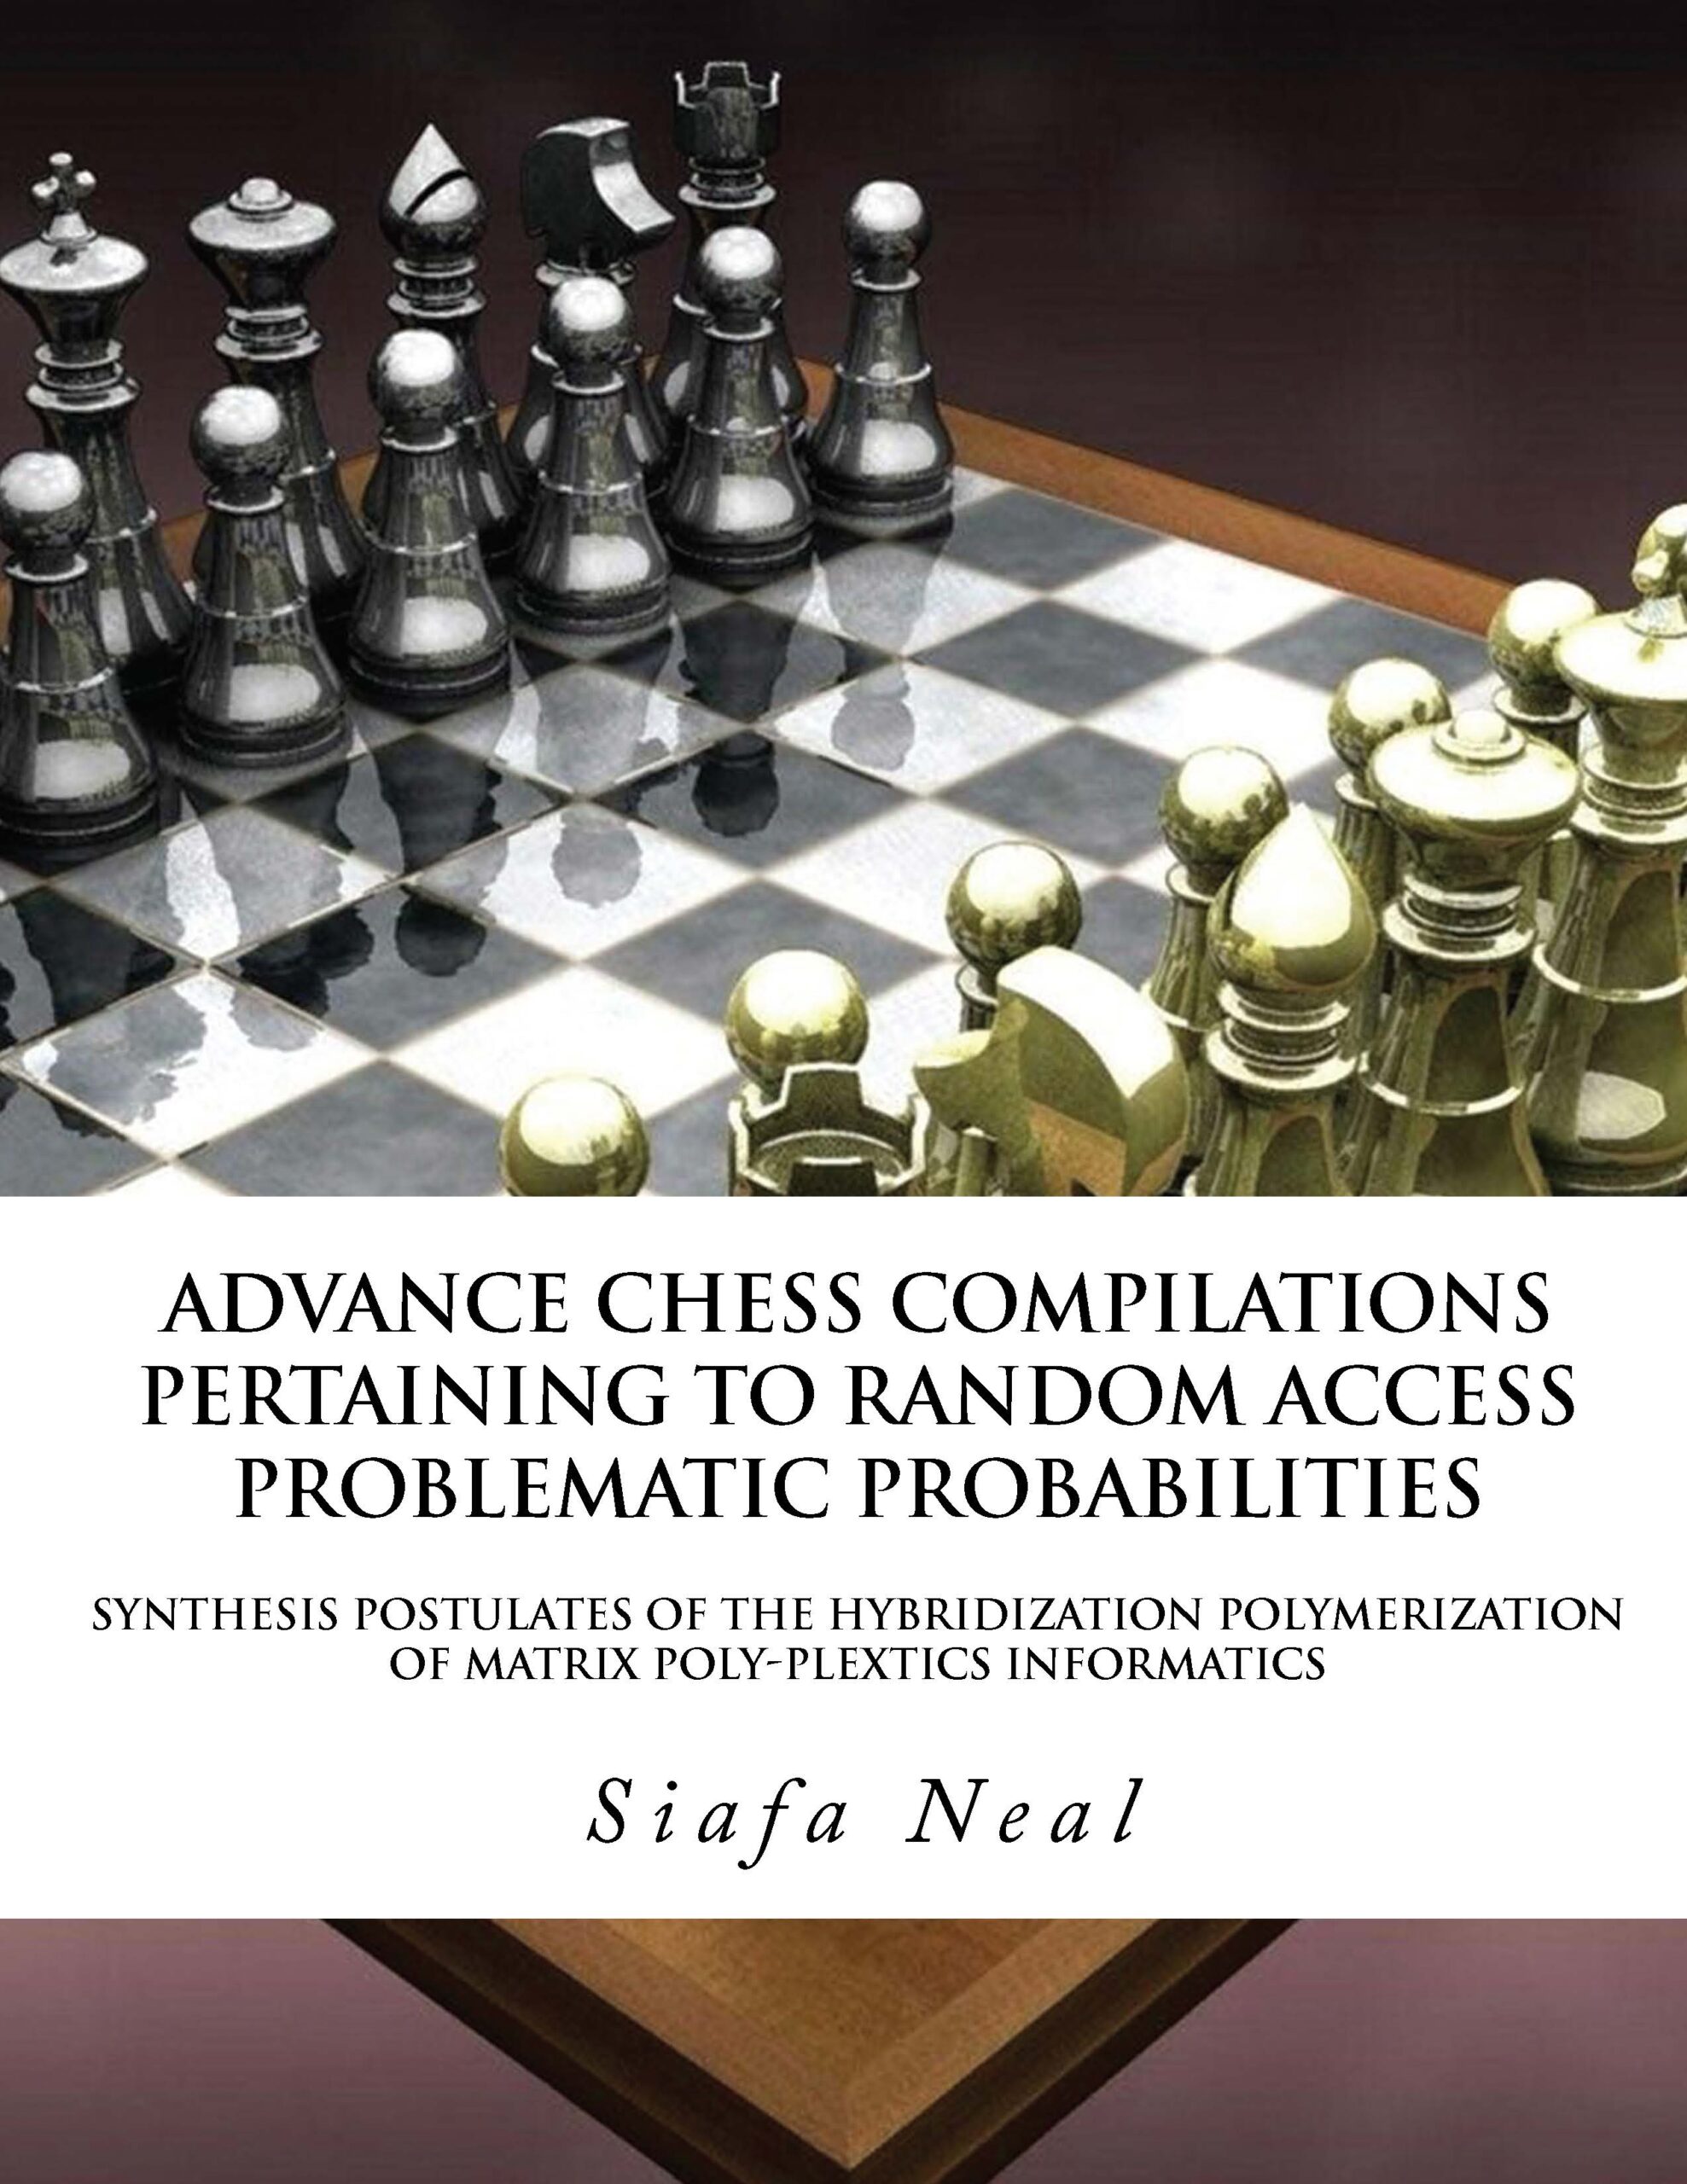 Advance Chess Compilations Pertaining to Random Access Problematic Probabilities